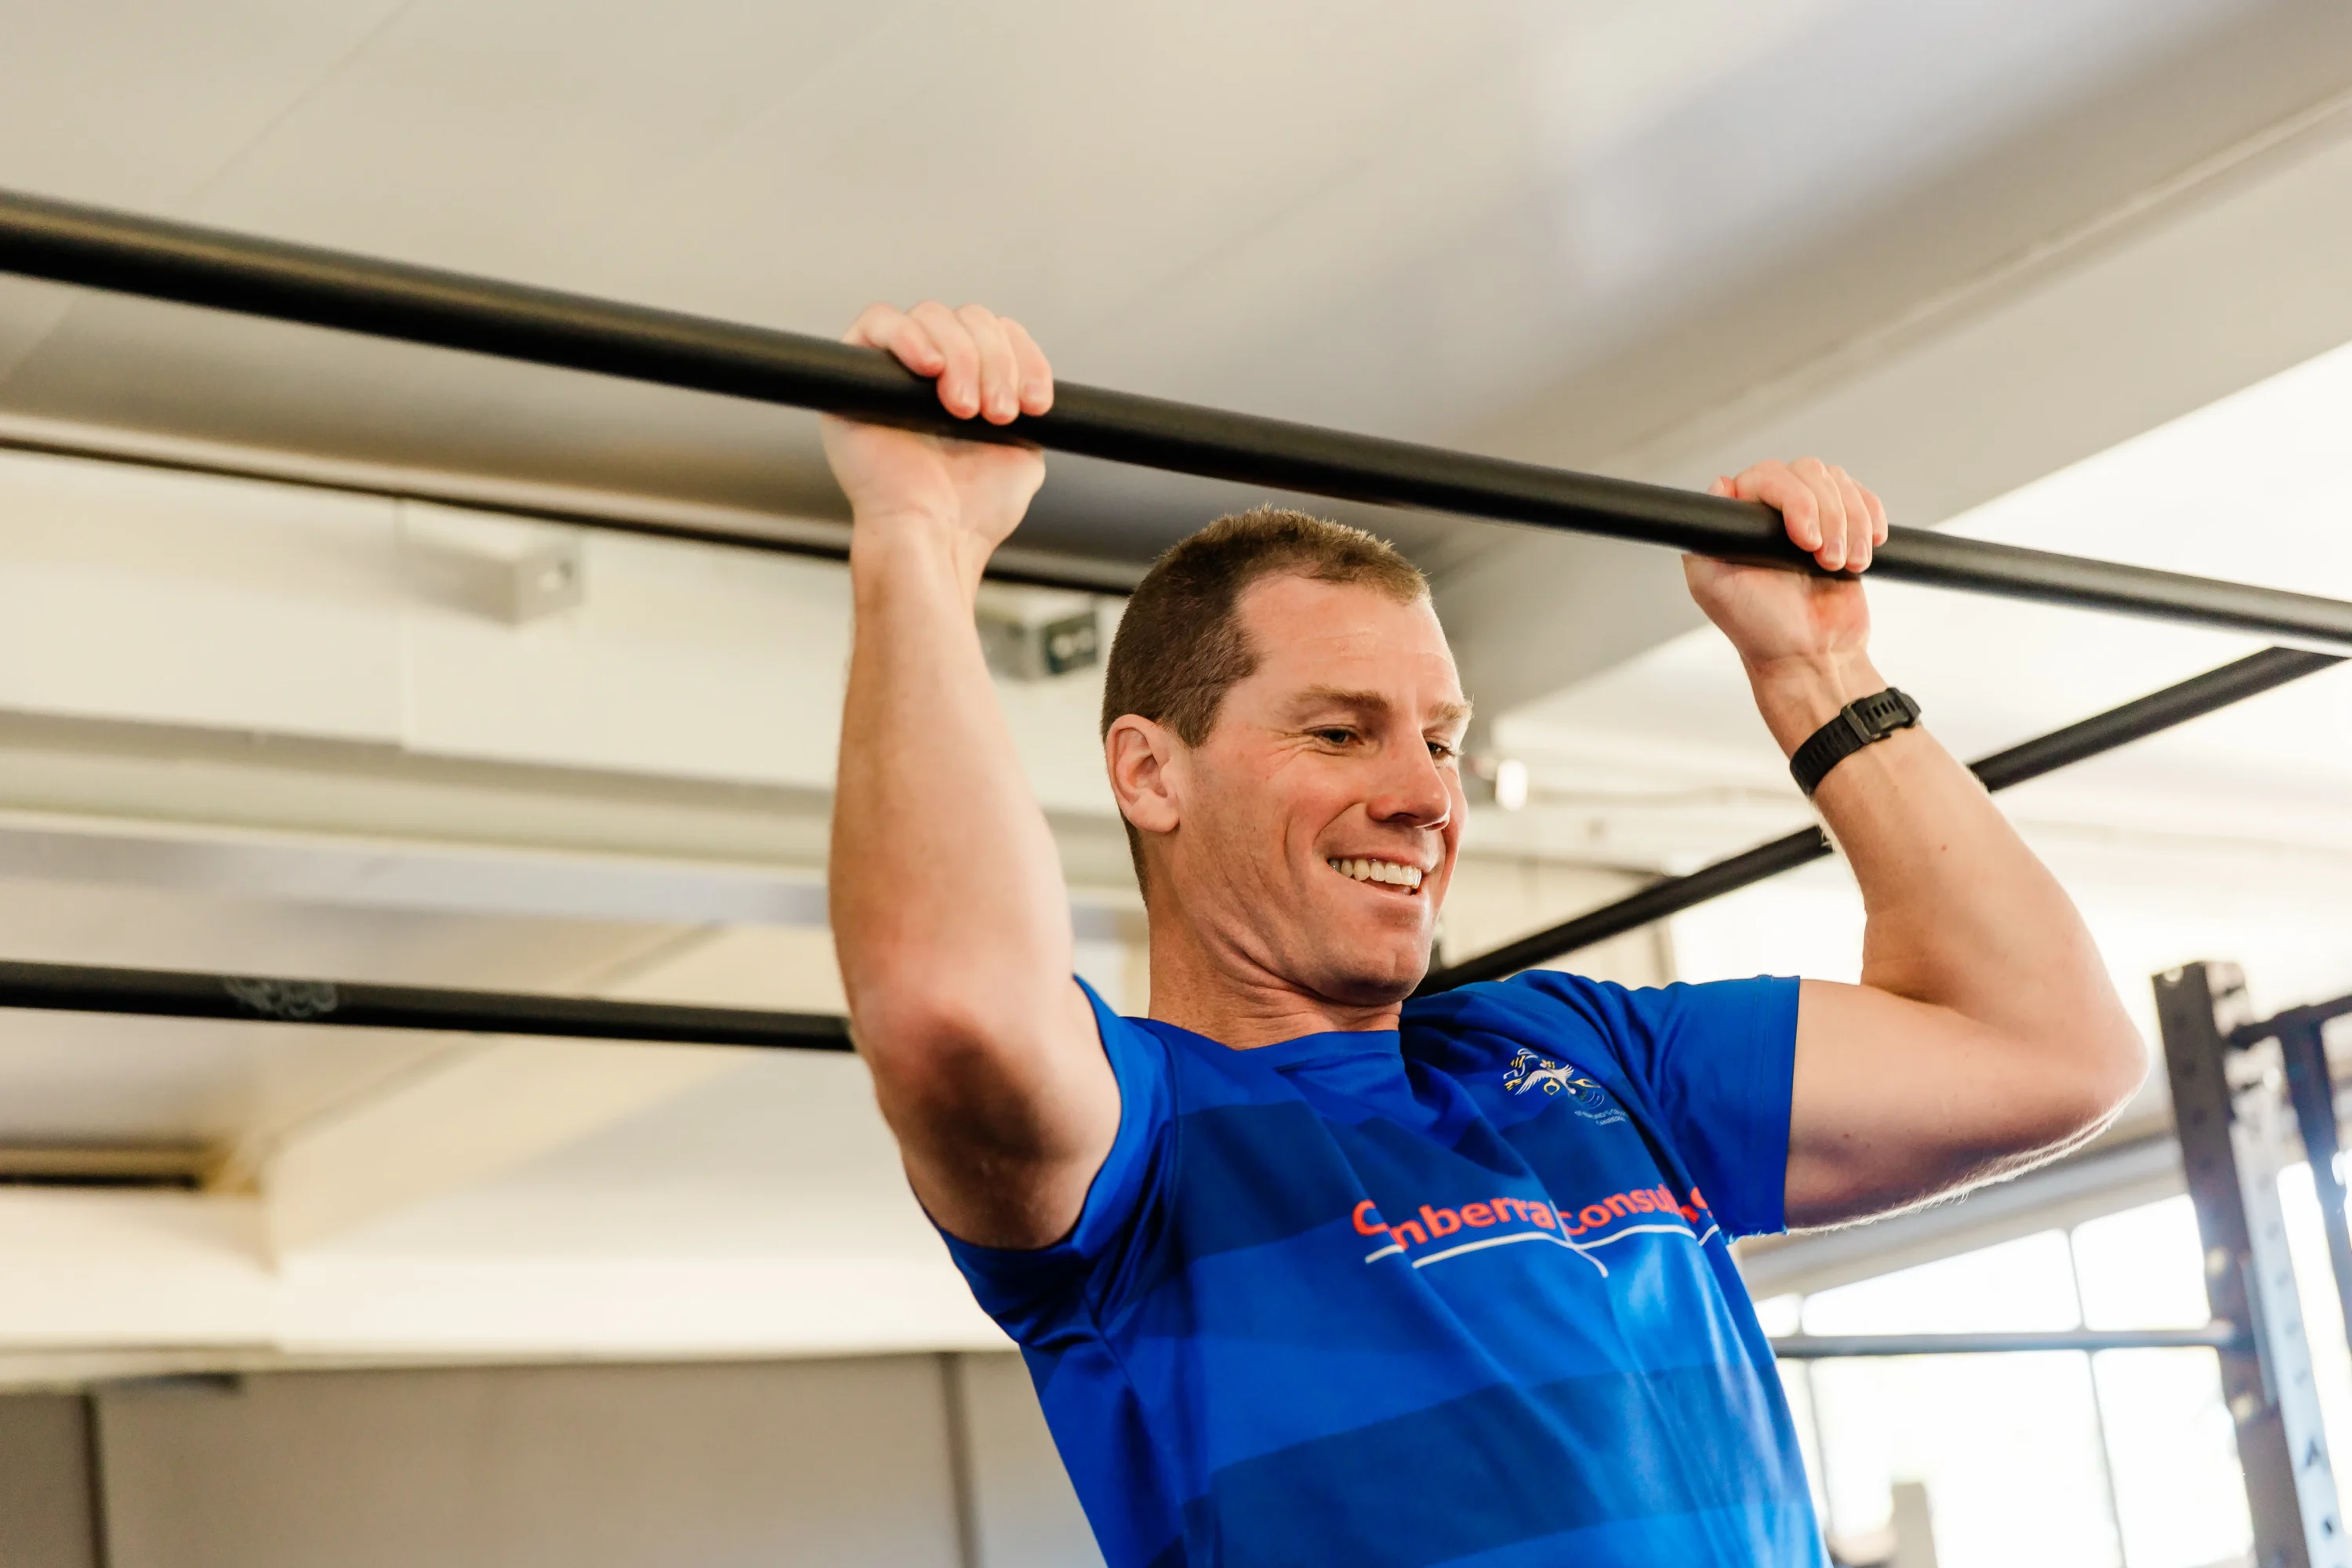 Male individual smiling in middle of pull up exercise